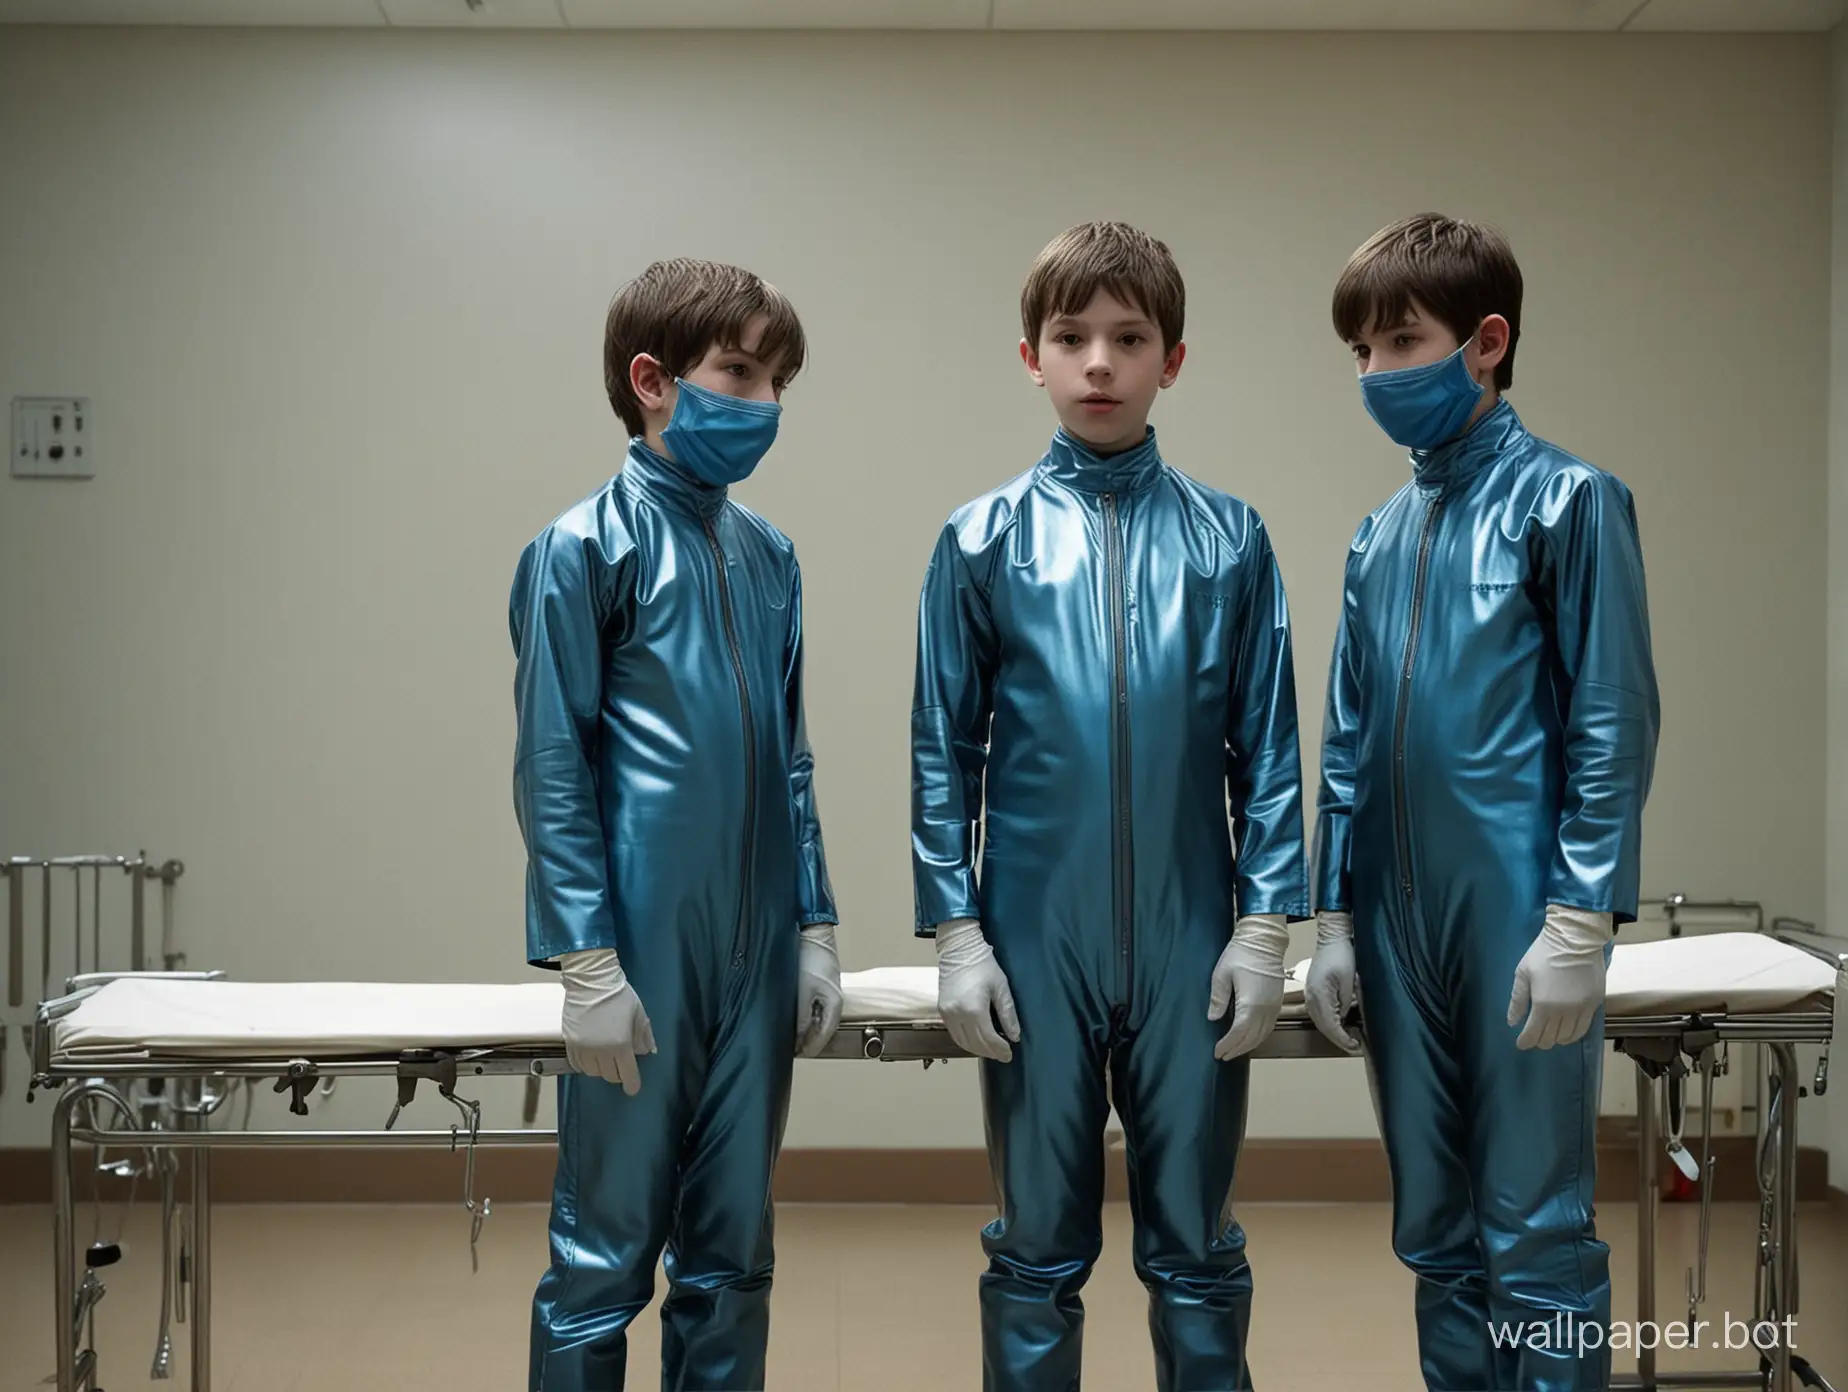 Young-Boys-in-Metallic-Blue-Latex-Suits-Amidst-Medical-Equipment